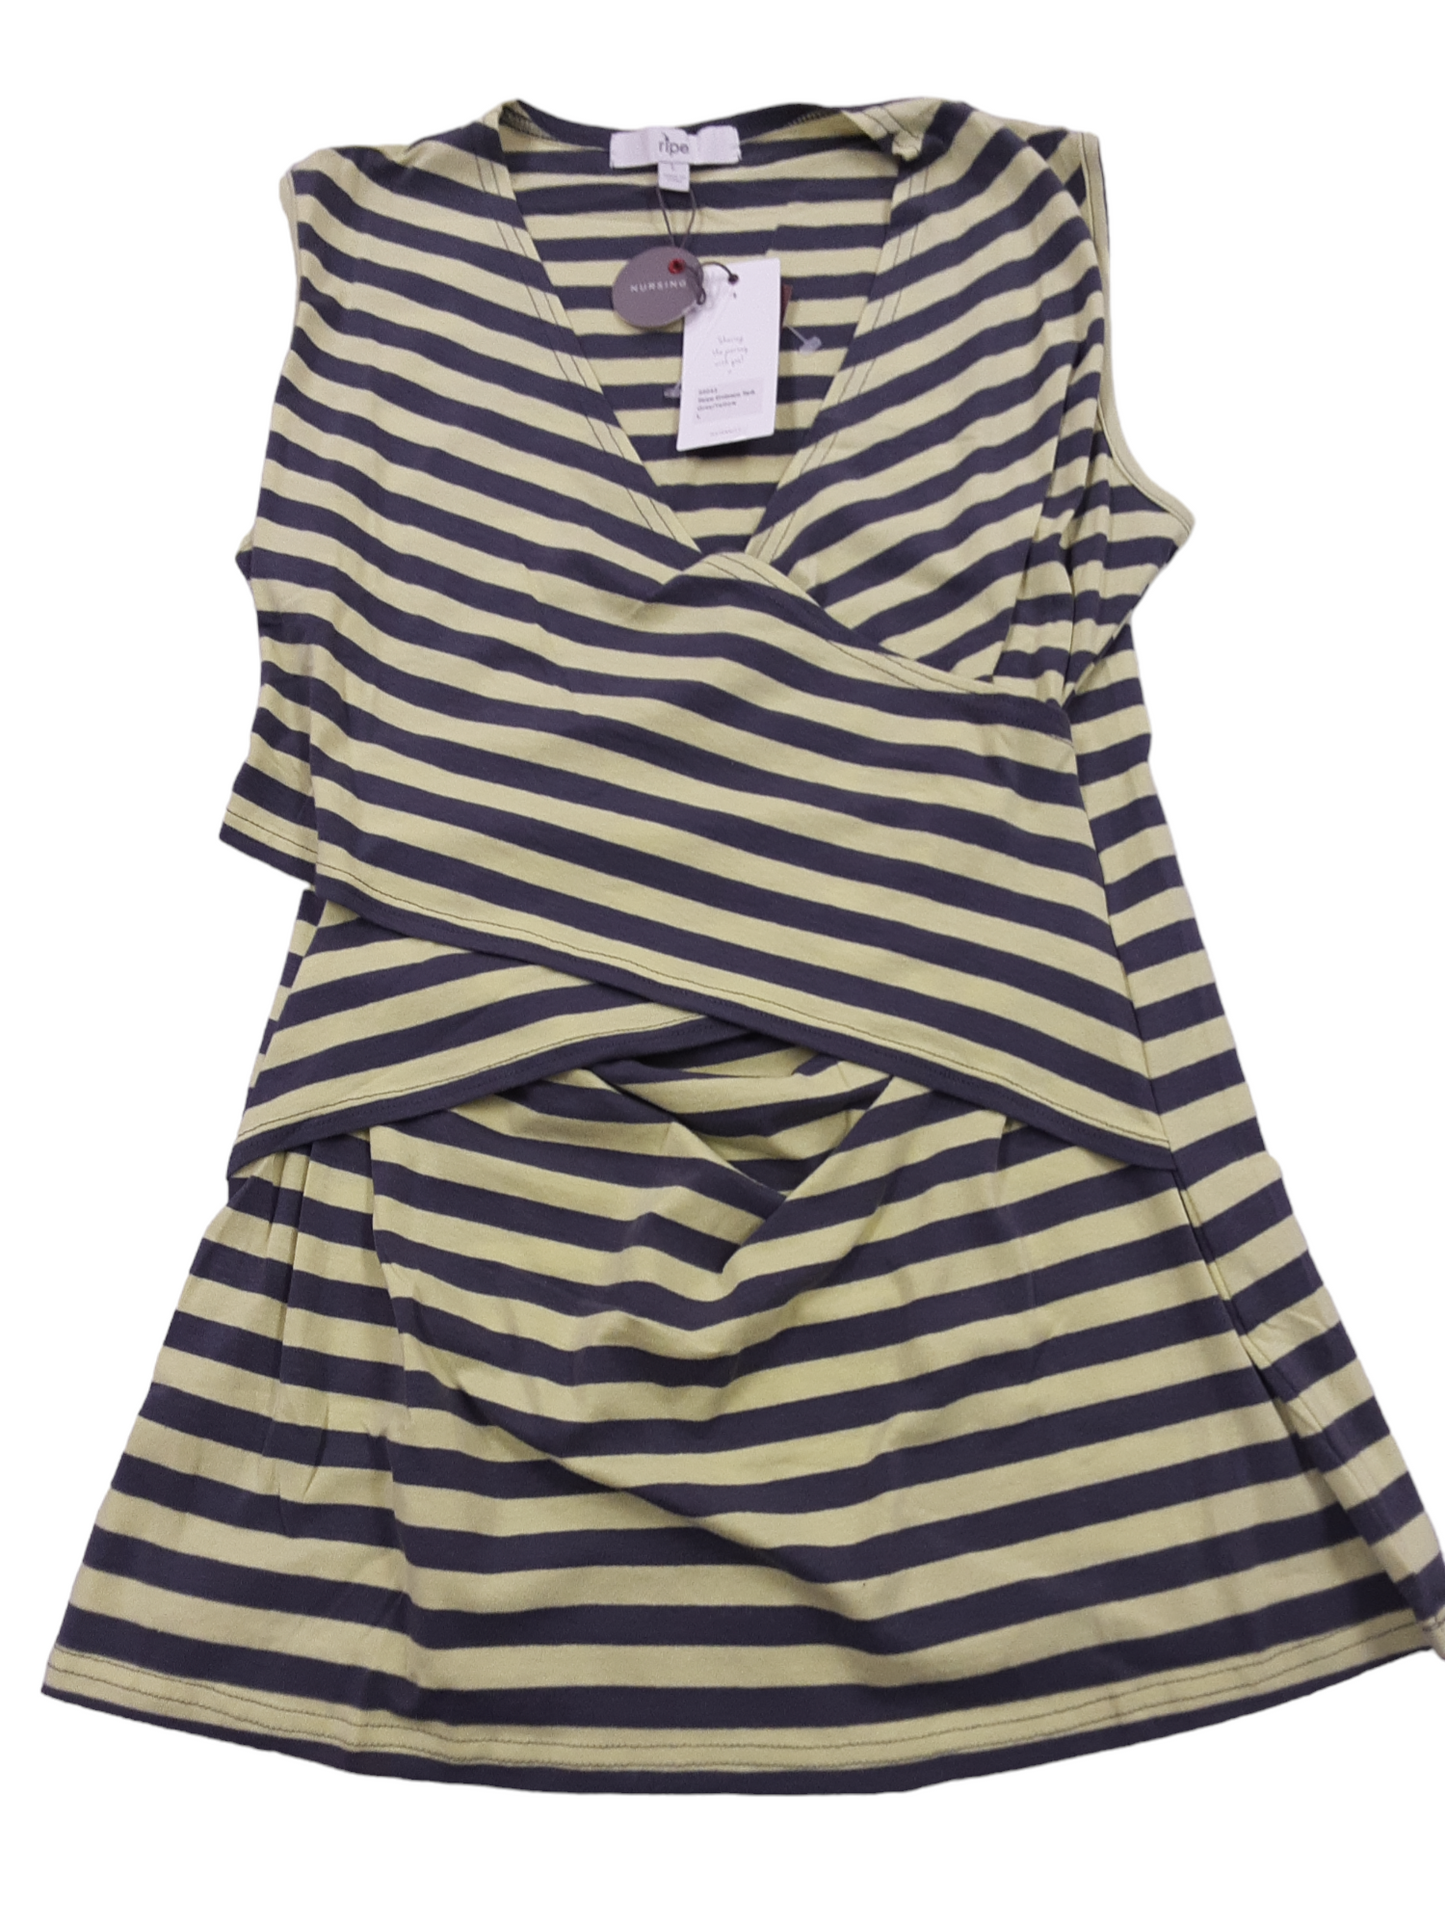 Yellow/ Grey striped Maternity and nursing top size Large